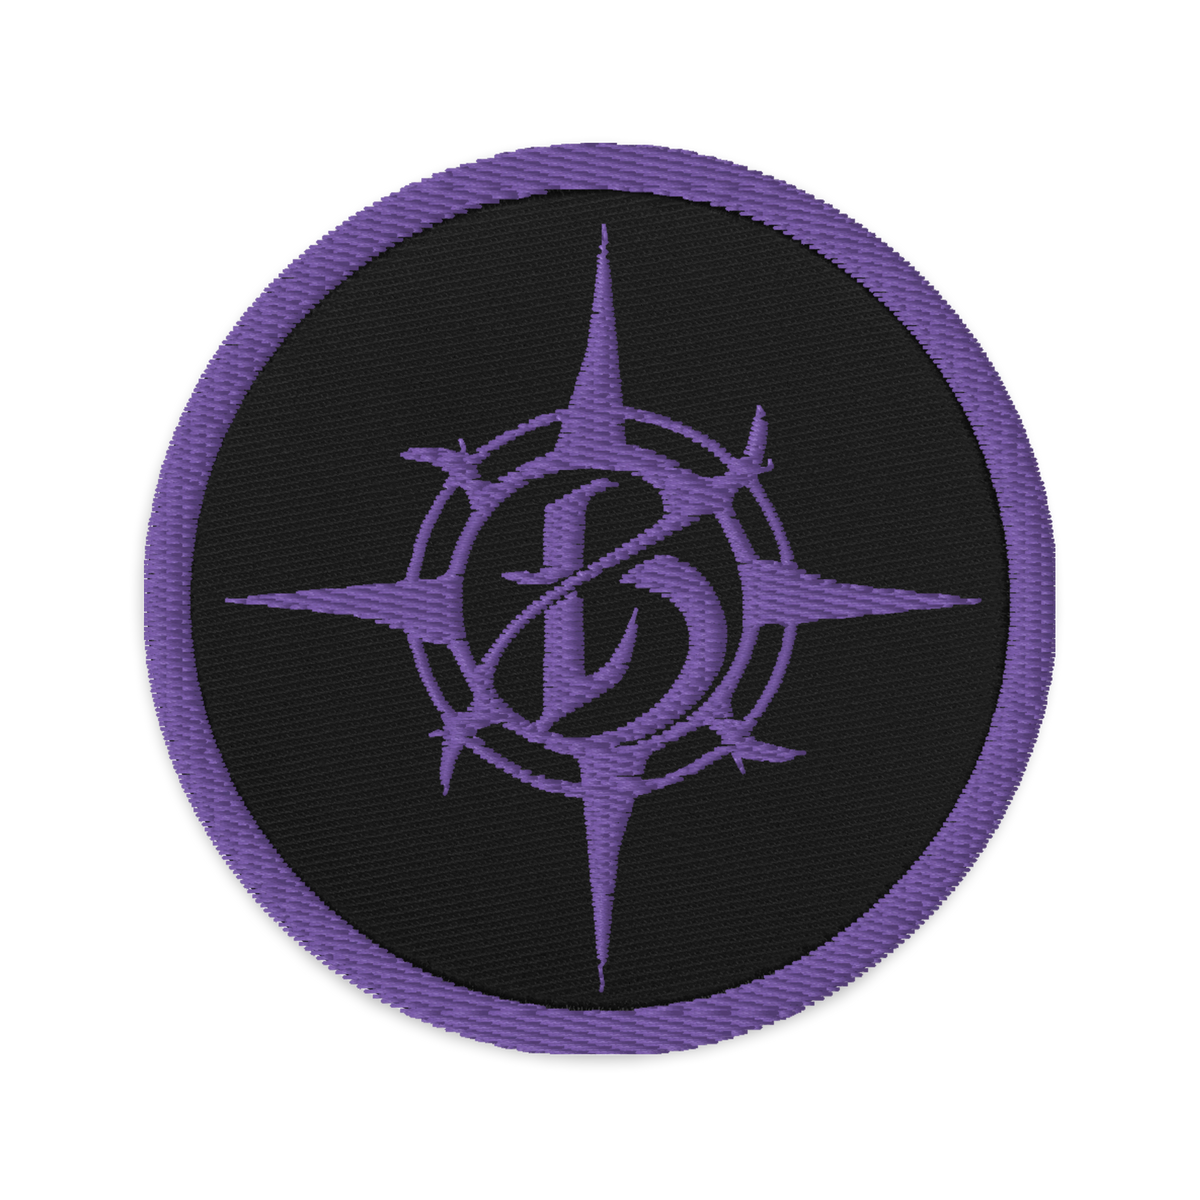 Borealis Compass Logo Embroidered Patch - Purple